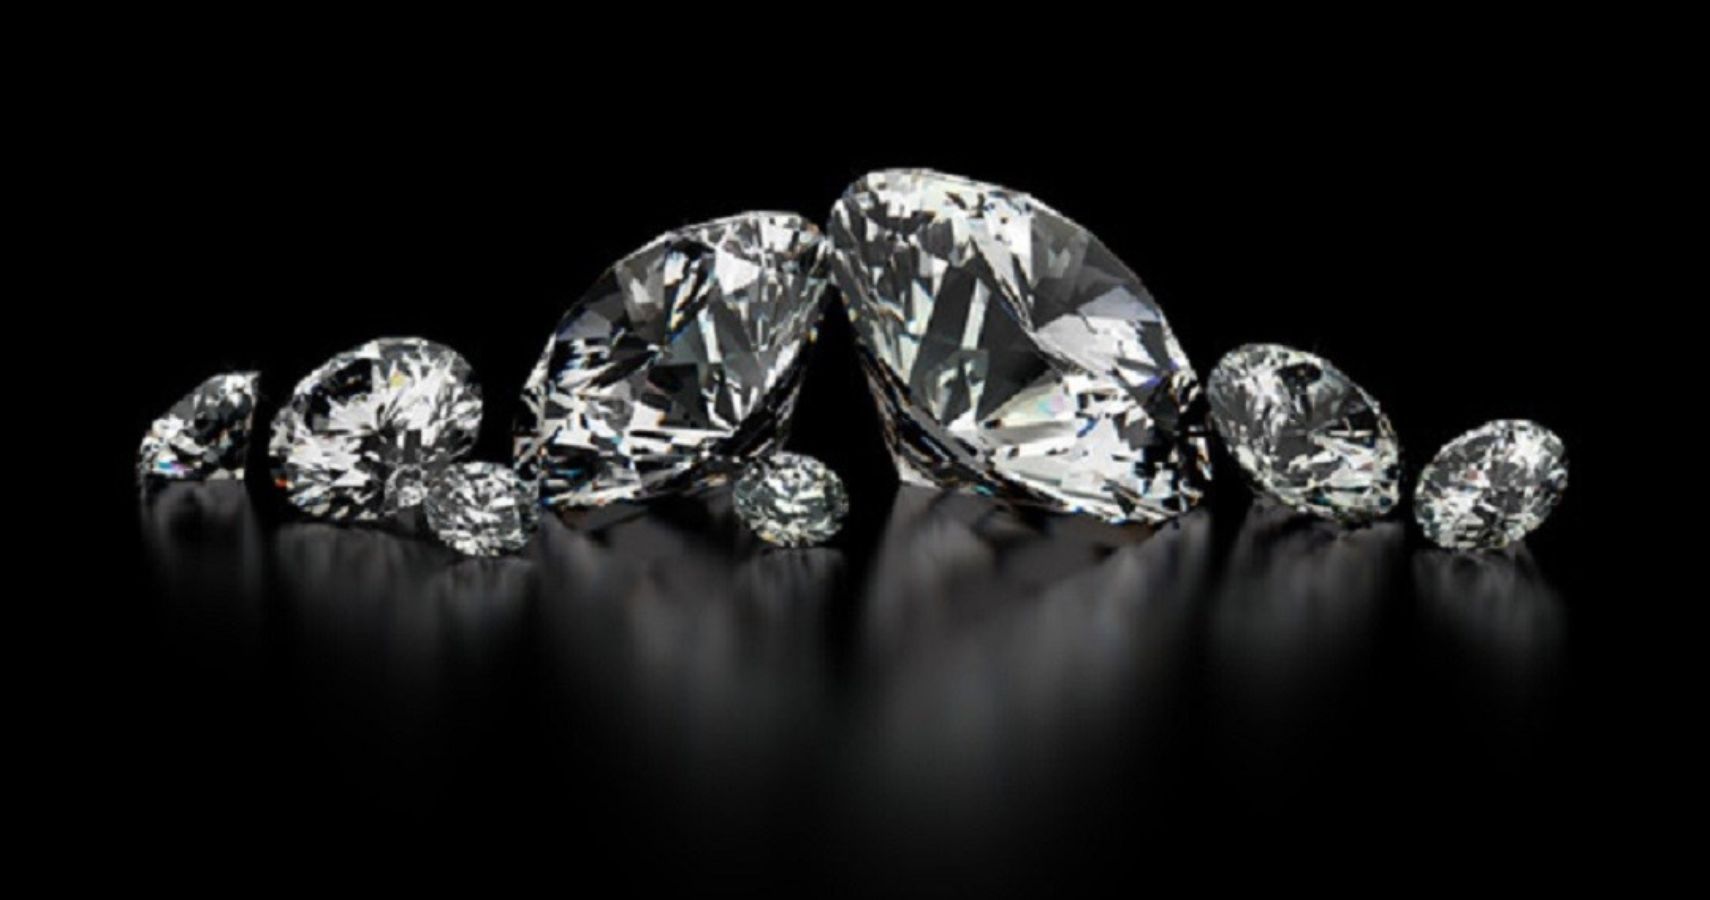 These Are The Most Expensive Diamonds In The World, As Of 2022